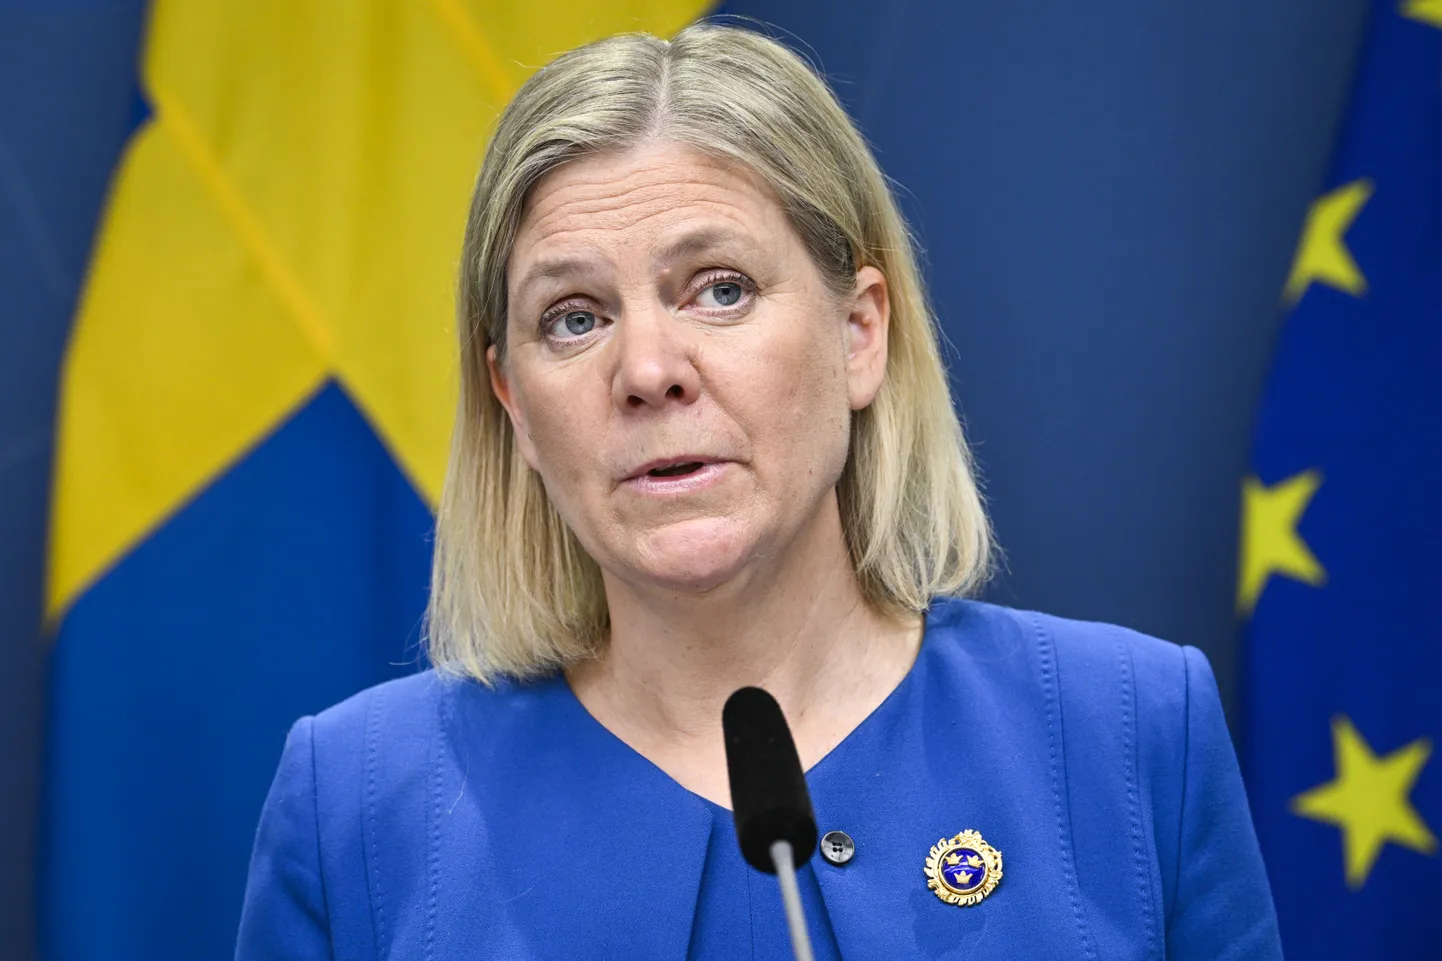 Sweden's Prime Minister Magdalena Andersson gives a news conference in Stockholm, Sweden, on May 16, 2022. Sweden's government has decided to apply for a NATO membership.
Photo: Henrik Montgomery / TT / code 10060